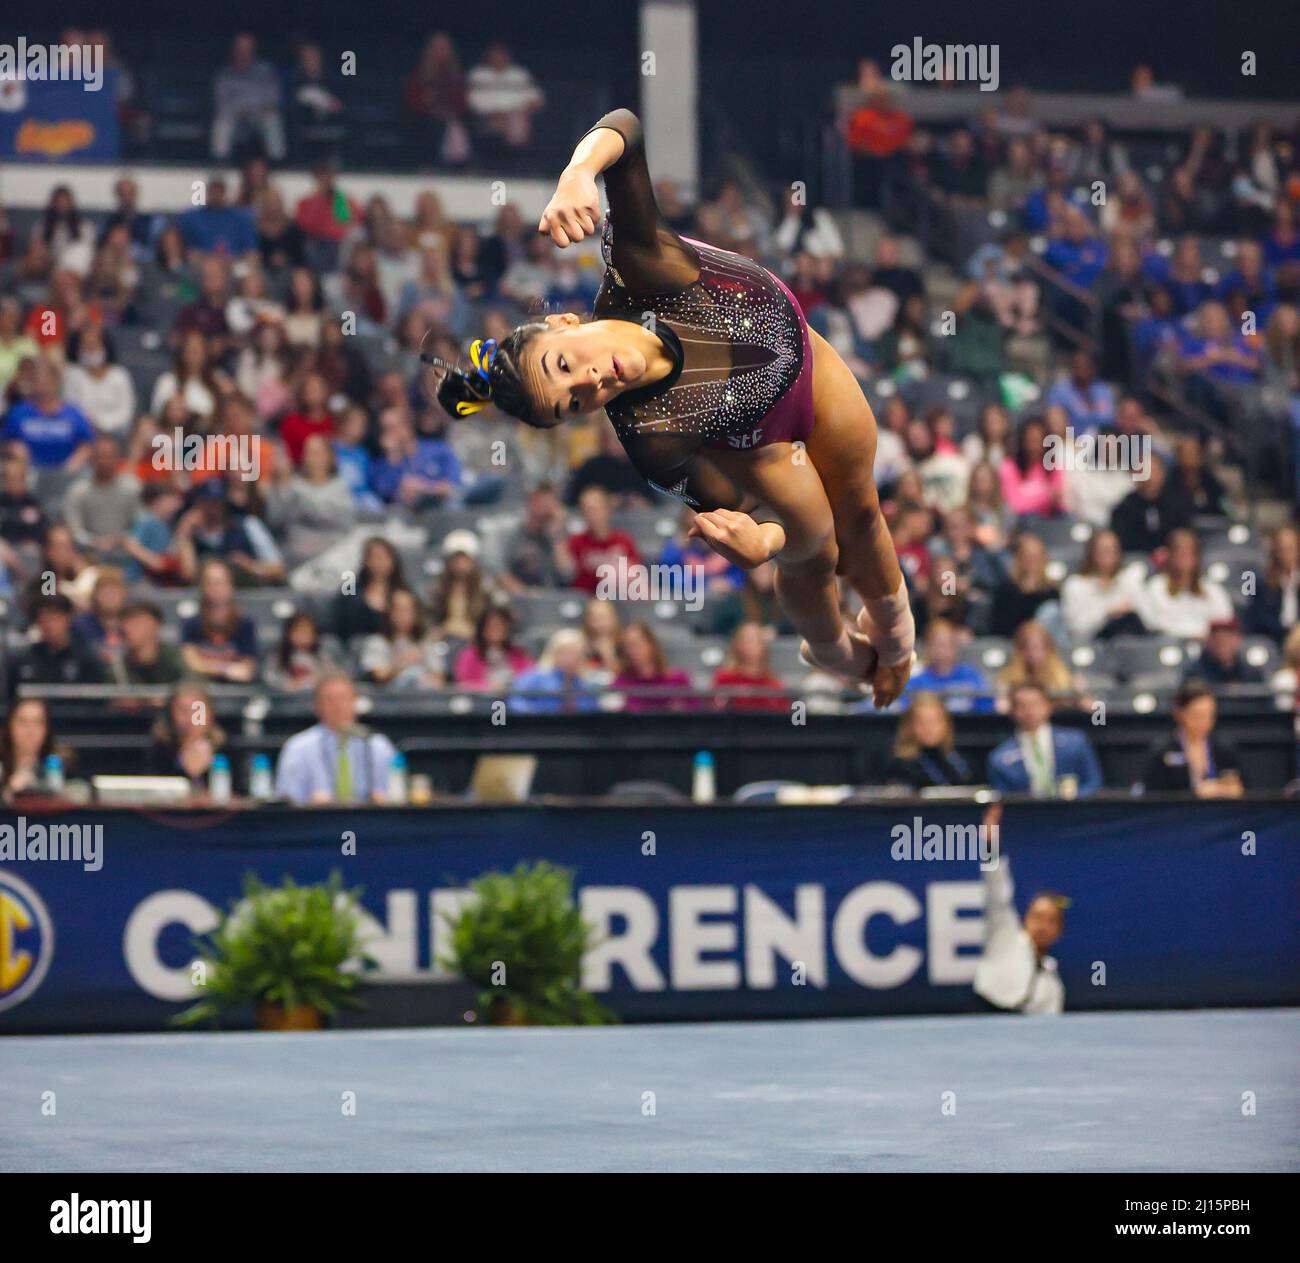 Birmingham, AL, USA. 19th Mar, 2022. Alabama's Luisa Blanco does a tumbling pass during her floor routine at the 2022 SEC Women's Gymnastics Championships at Legacy Arena in Birmingham, AL. Kyle Okita/CSM/Alamy Live News Stock Photo